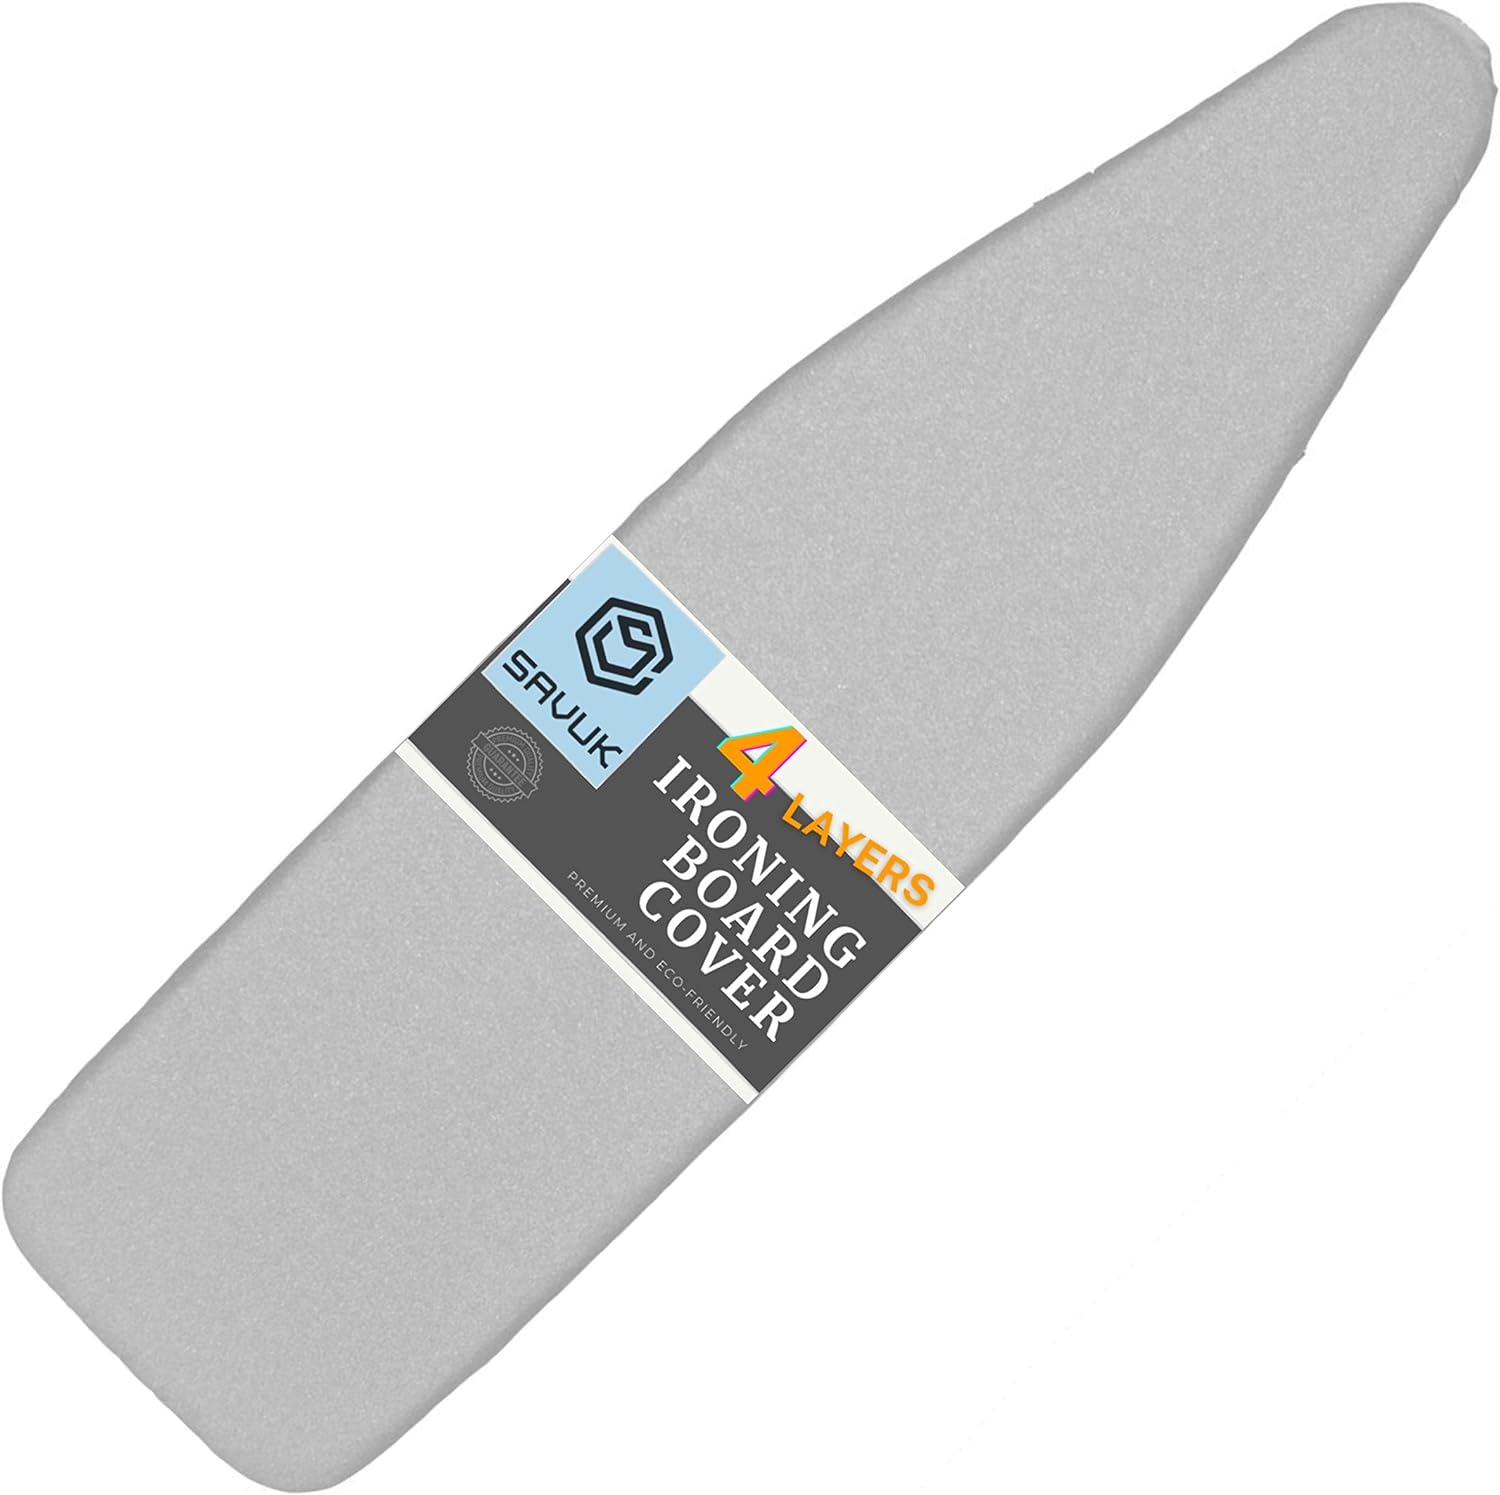 Best Cover for Ironing Board: Top 5 Picks for a Wrinkle-Free Experience